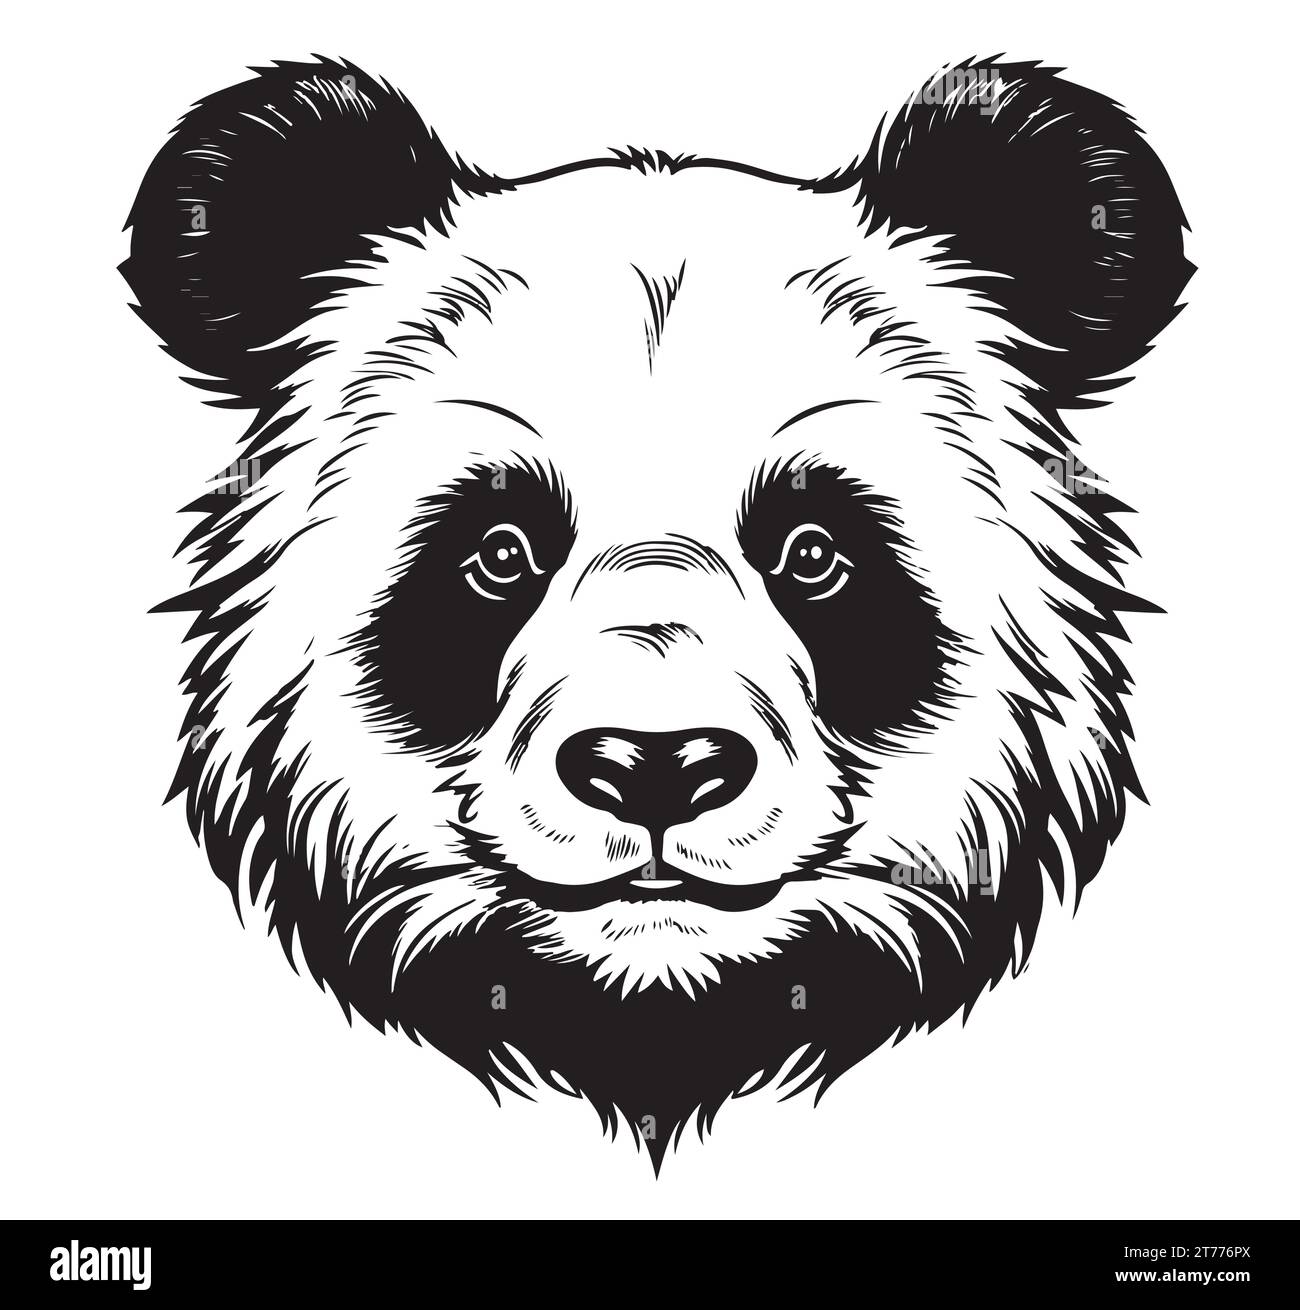 Black and white vector sketch of a Giant Panda face Stock Vector